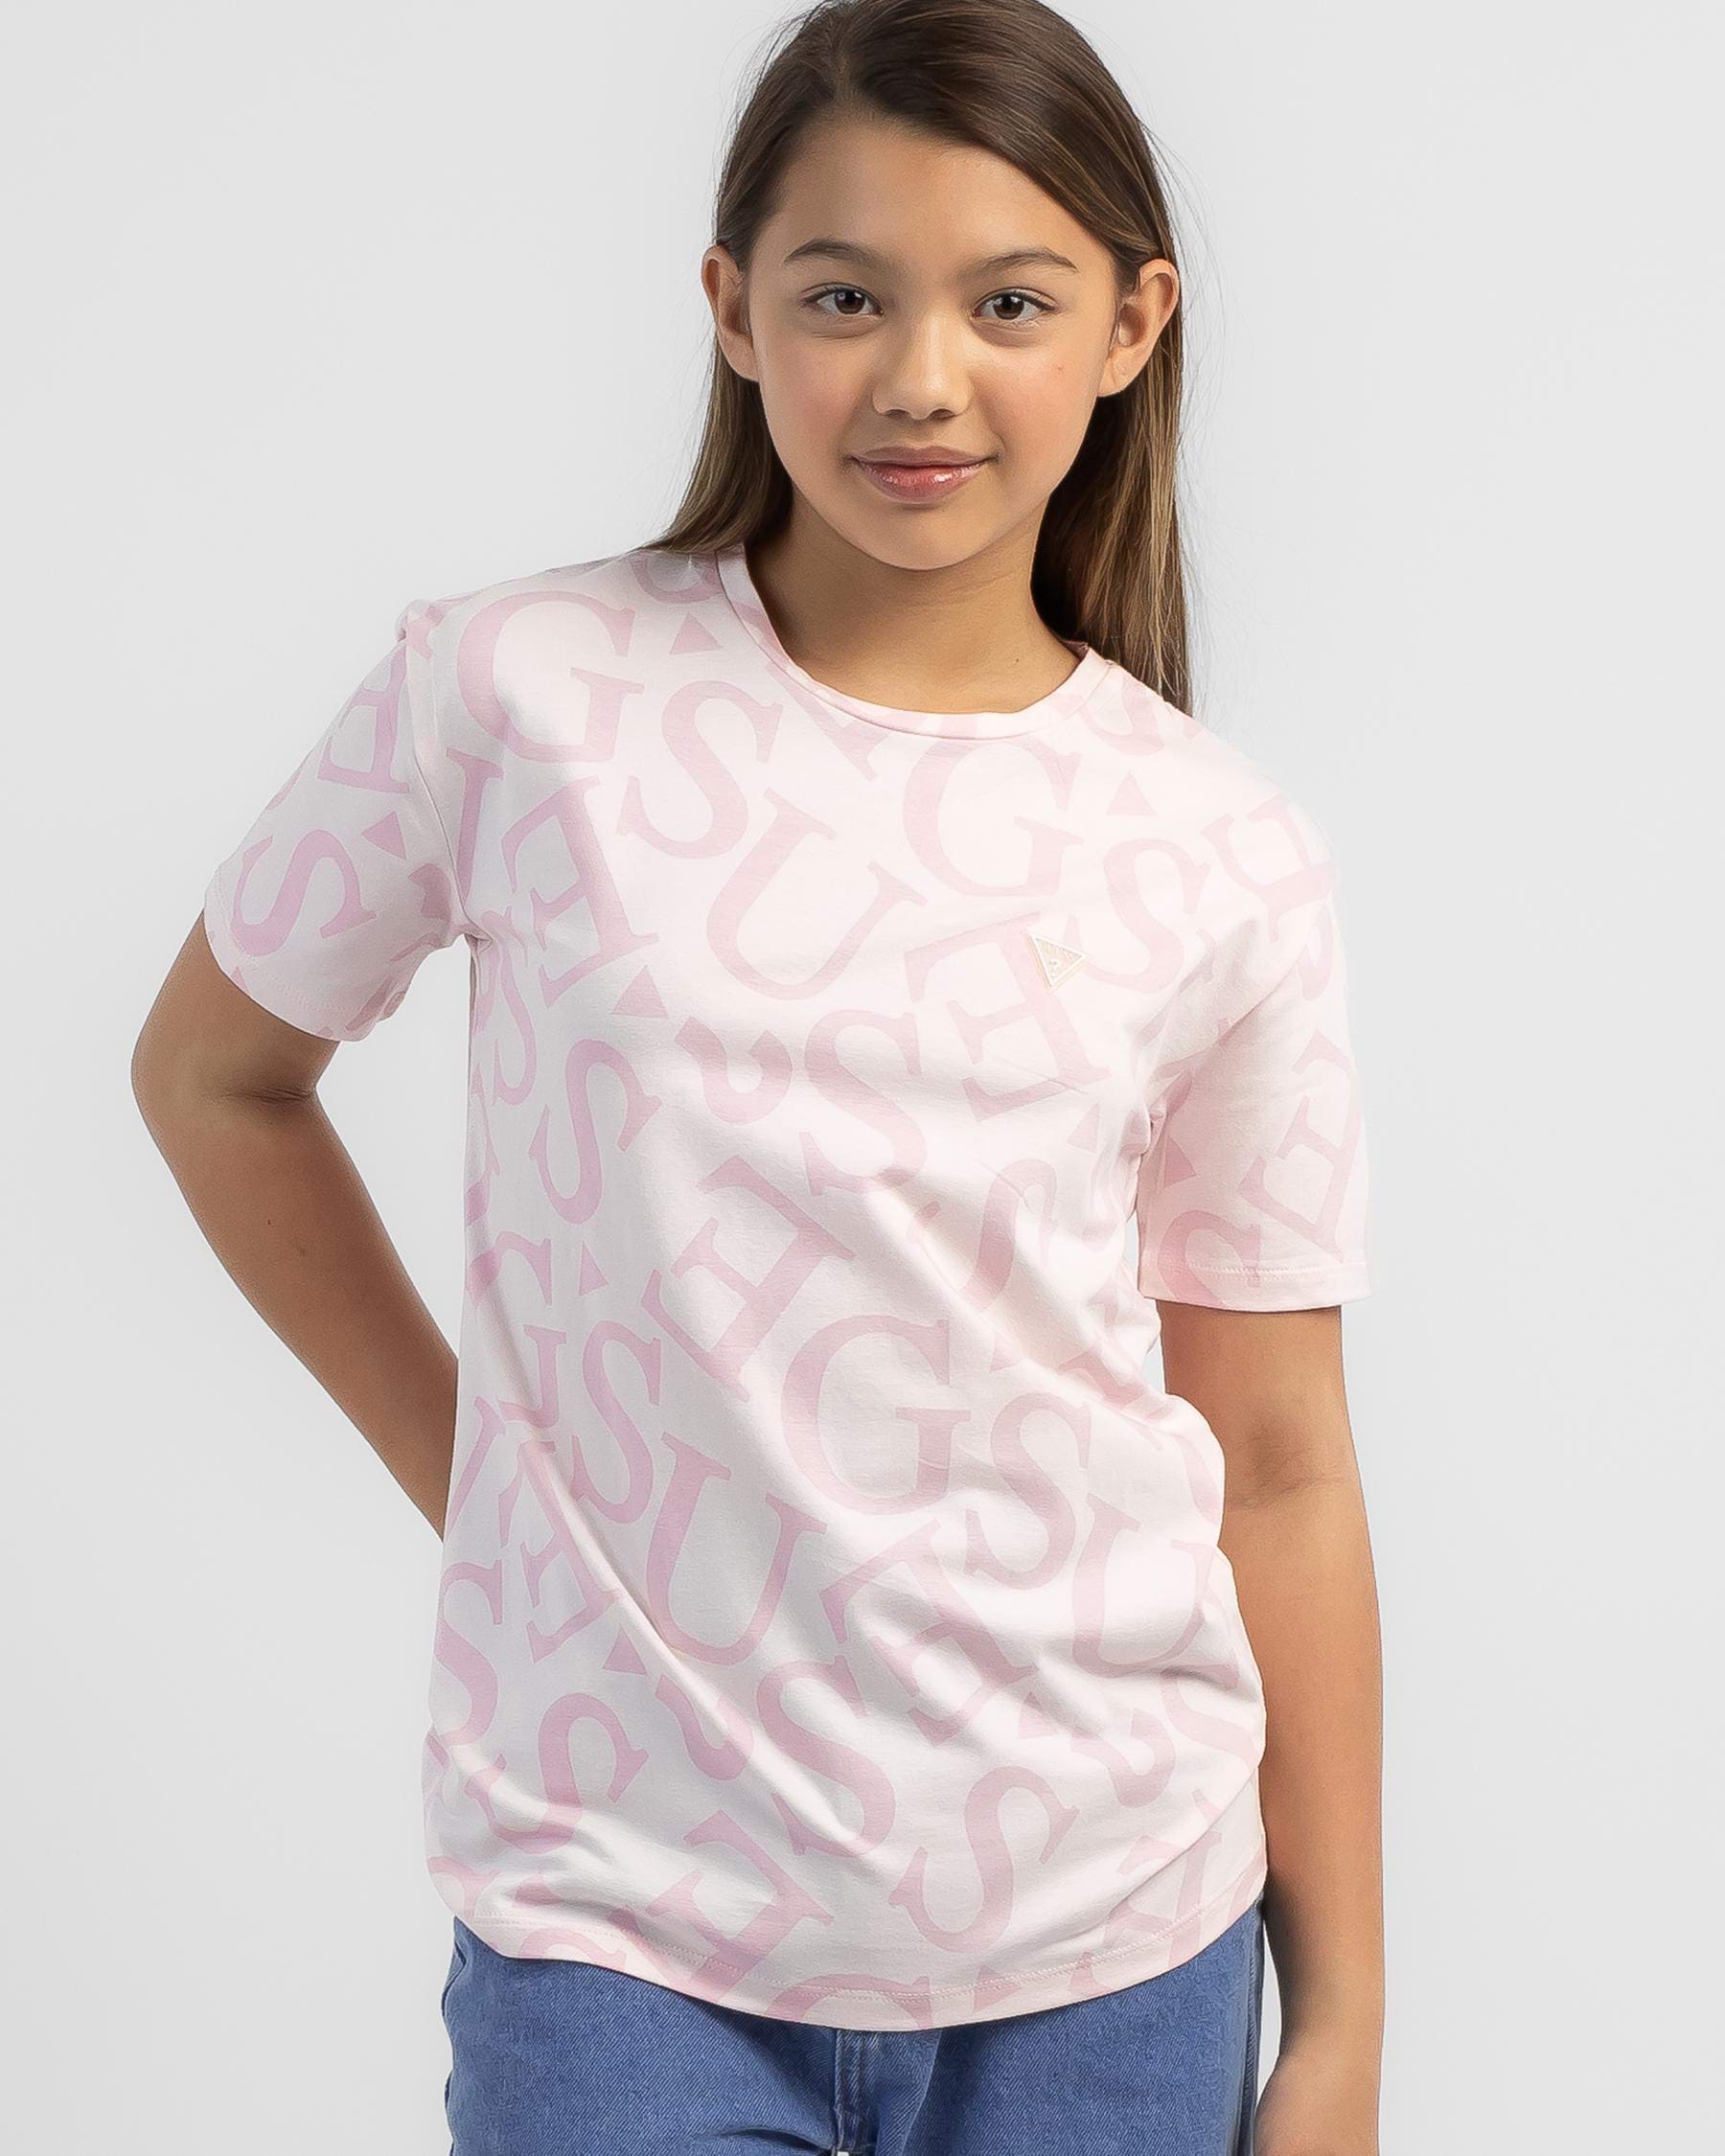 GUESS Girls' Jumbled T-Shirt In Ballet Pink - Fast Shipping & Easy ...